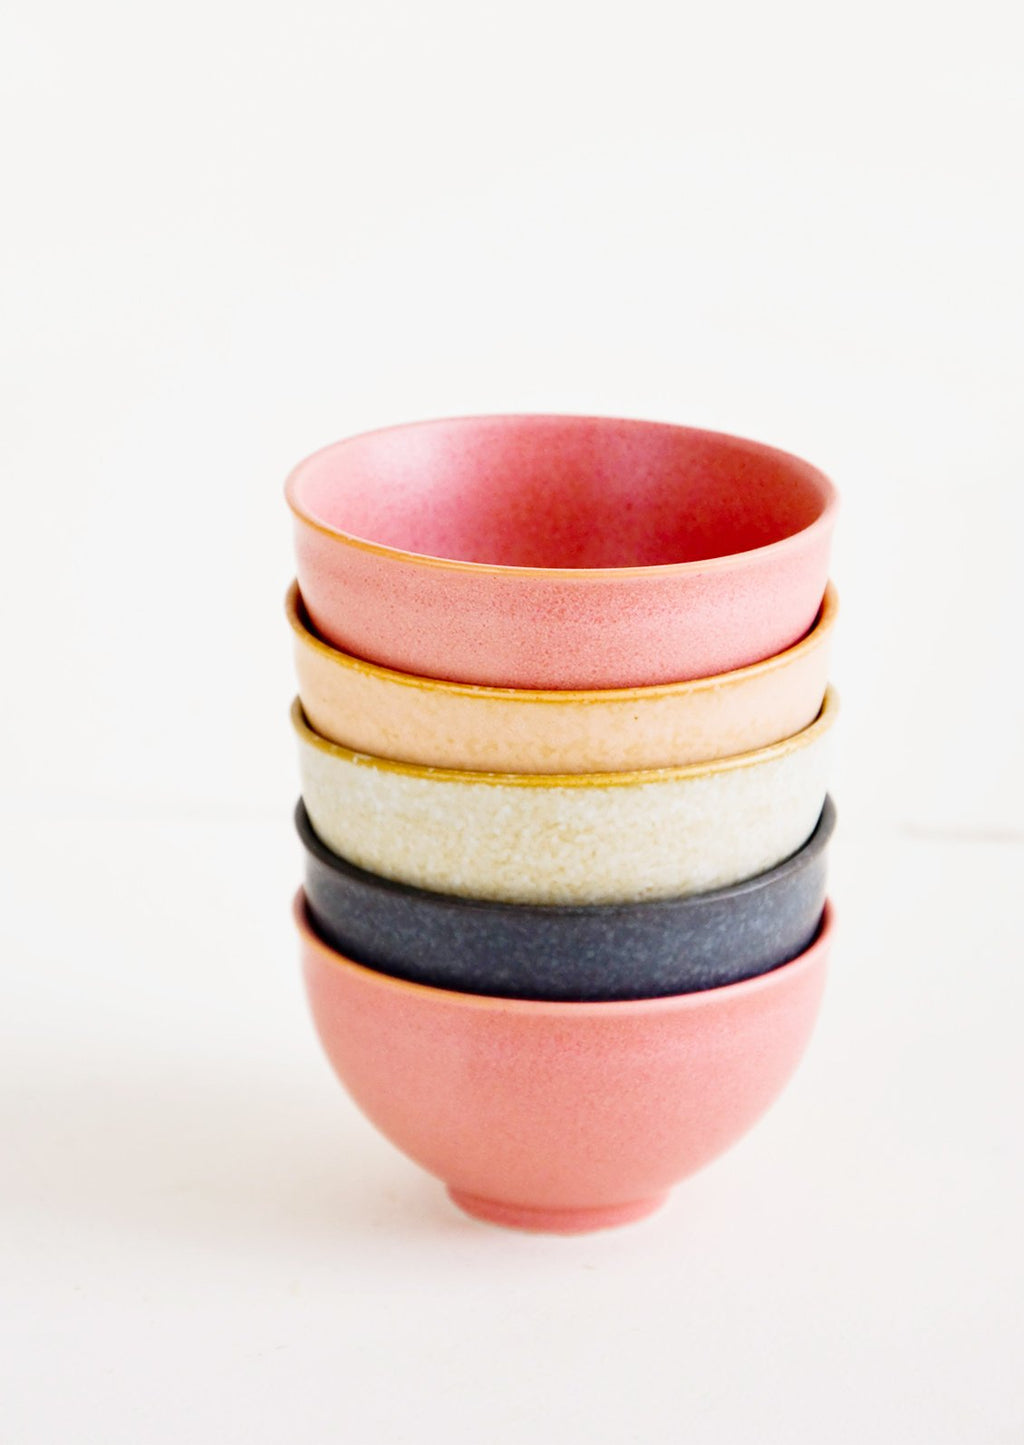 2: Stacked tower of small ceramic bowls in pink, peach, grey and black colors